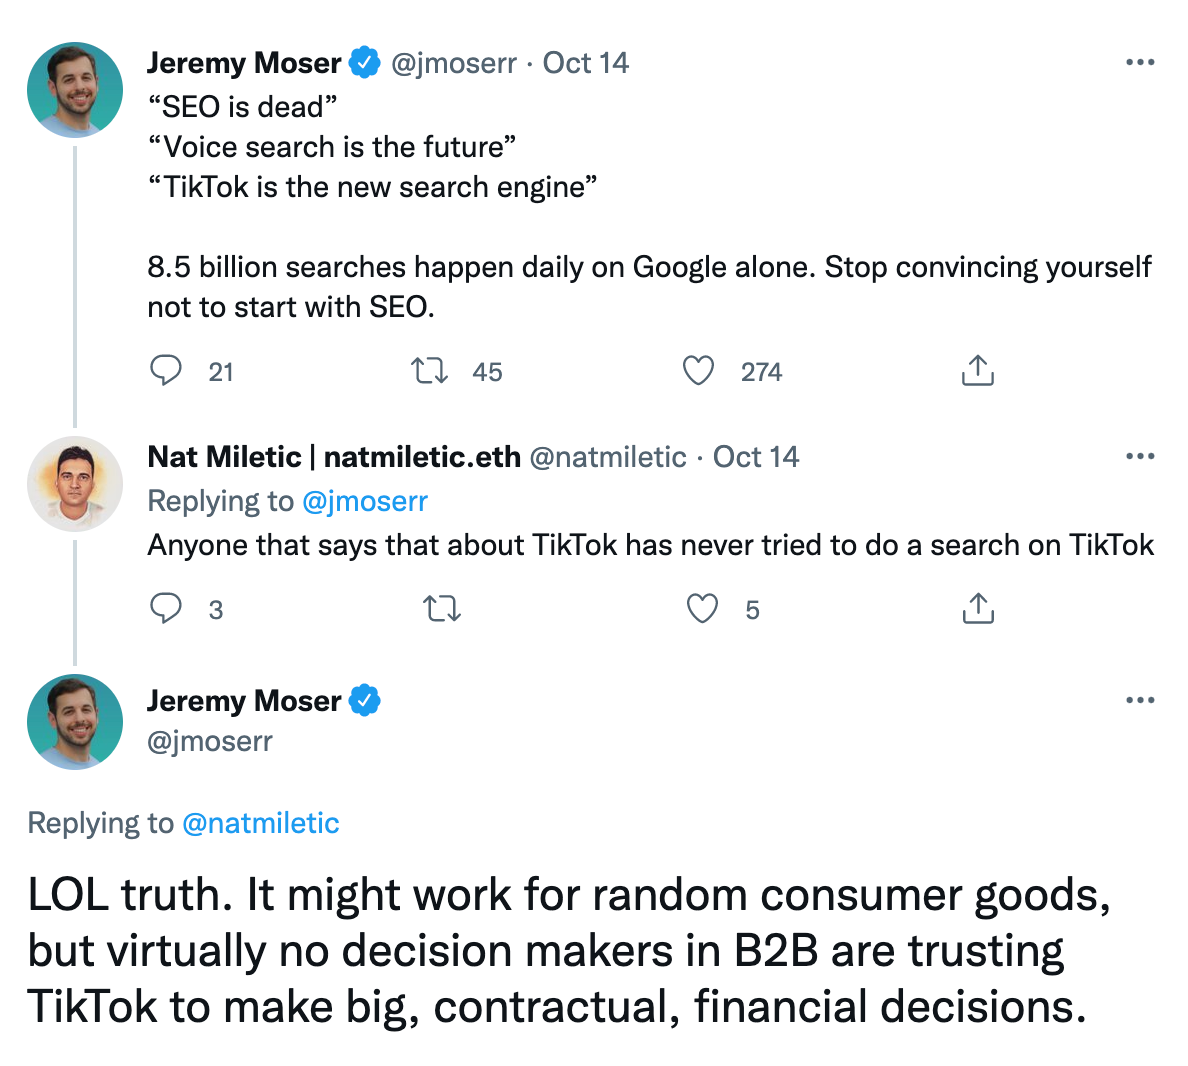 tweet from @jmoserr: "SEO is dead." "Voice search is the future." "TikTok is the new search engine." 8.5 billion searches happy daily on Google alone. Stop convincing yourself not to start with SEO. His tweet goes on to say TikTok is best for random consumer goods, "but virtually no decision makers in B2B are trusting TikTok to make big financial decisions."